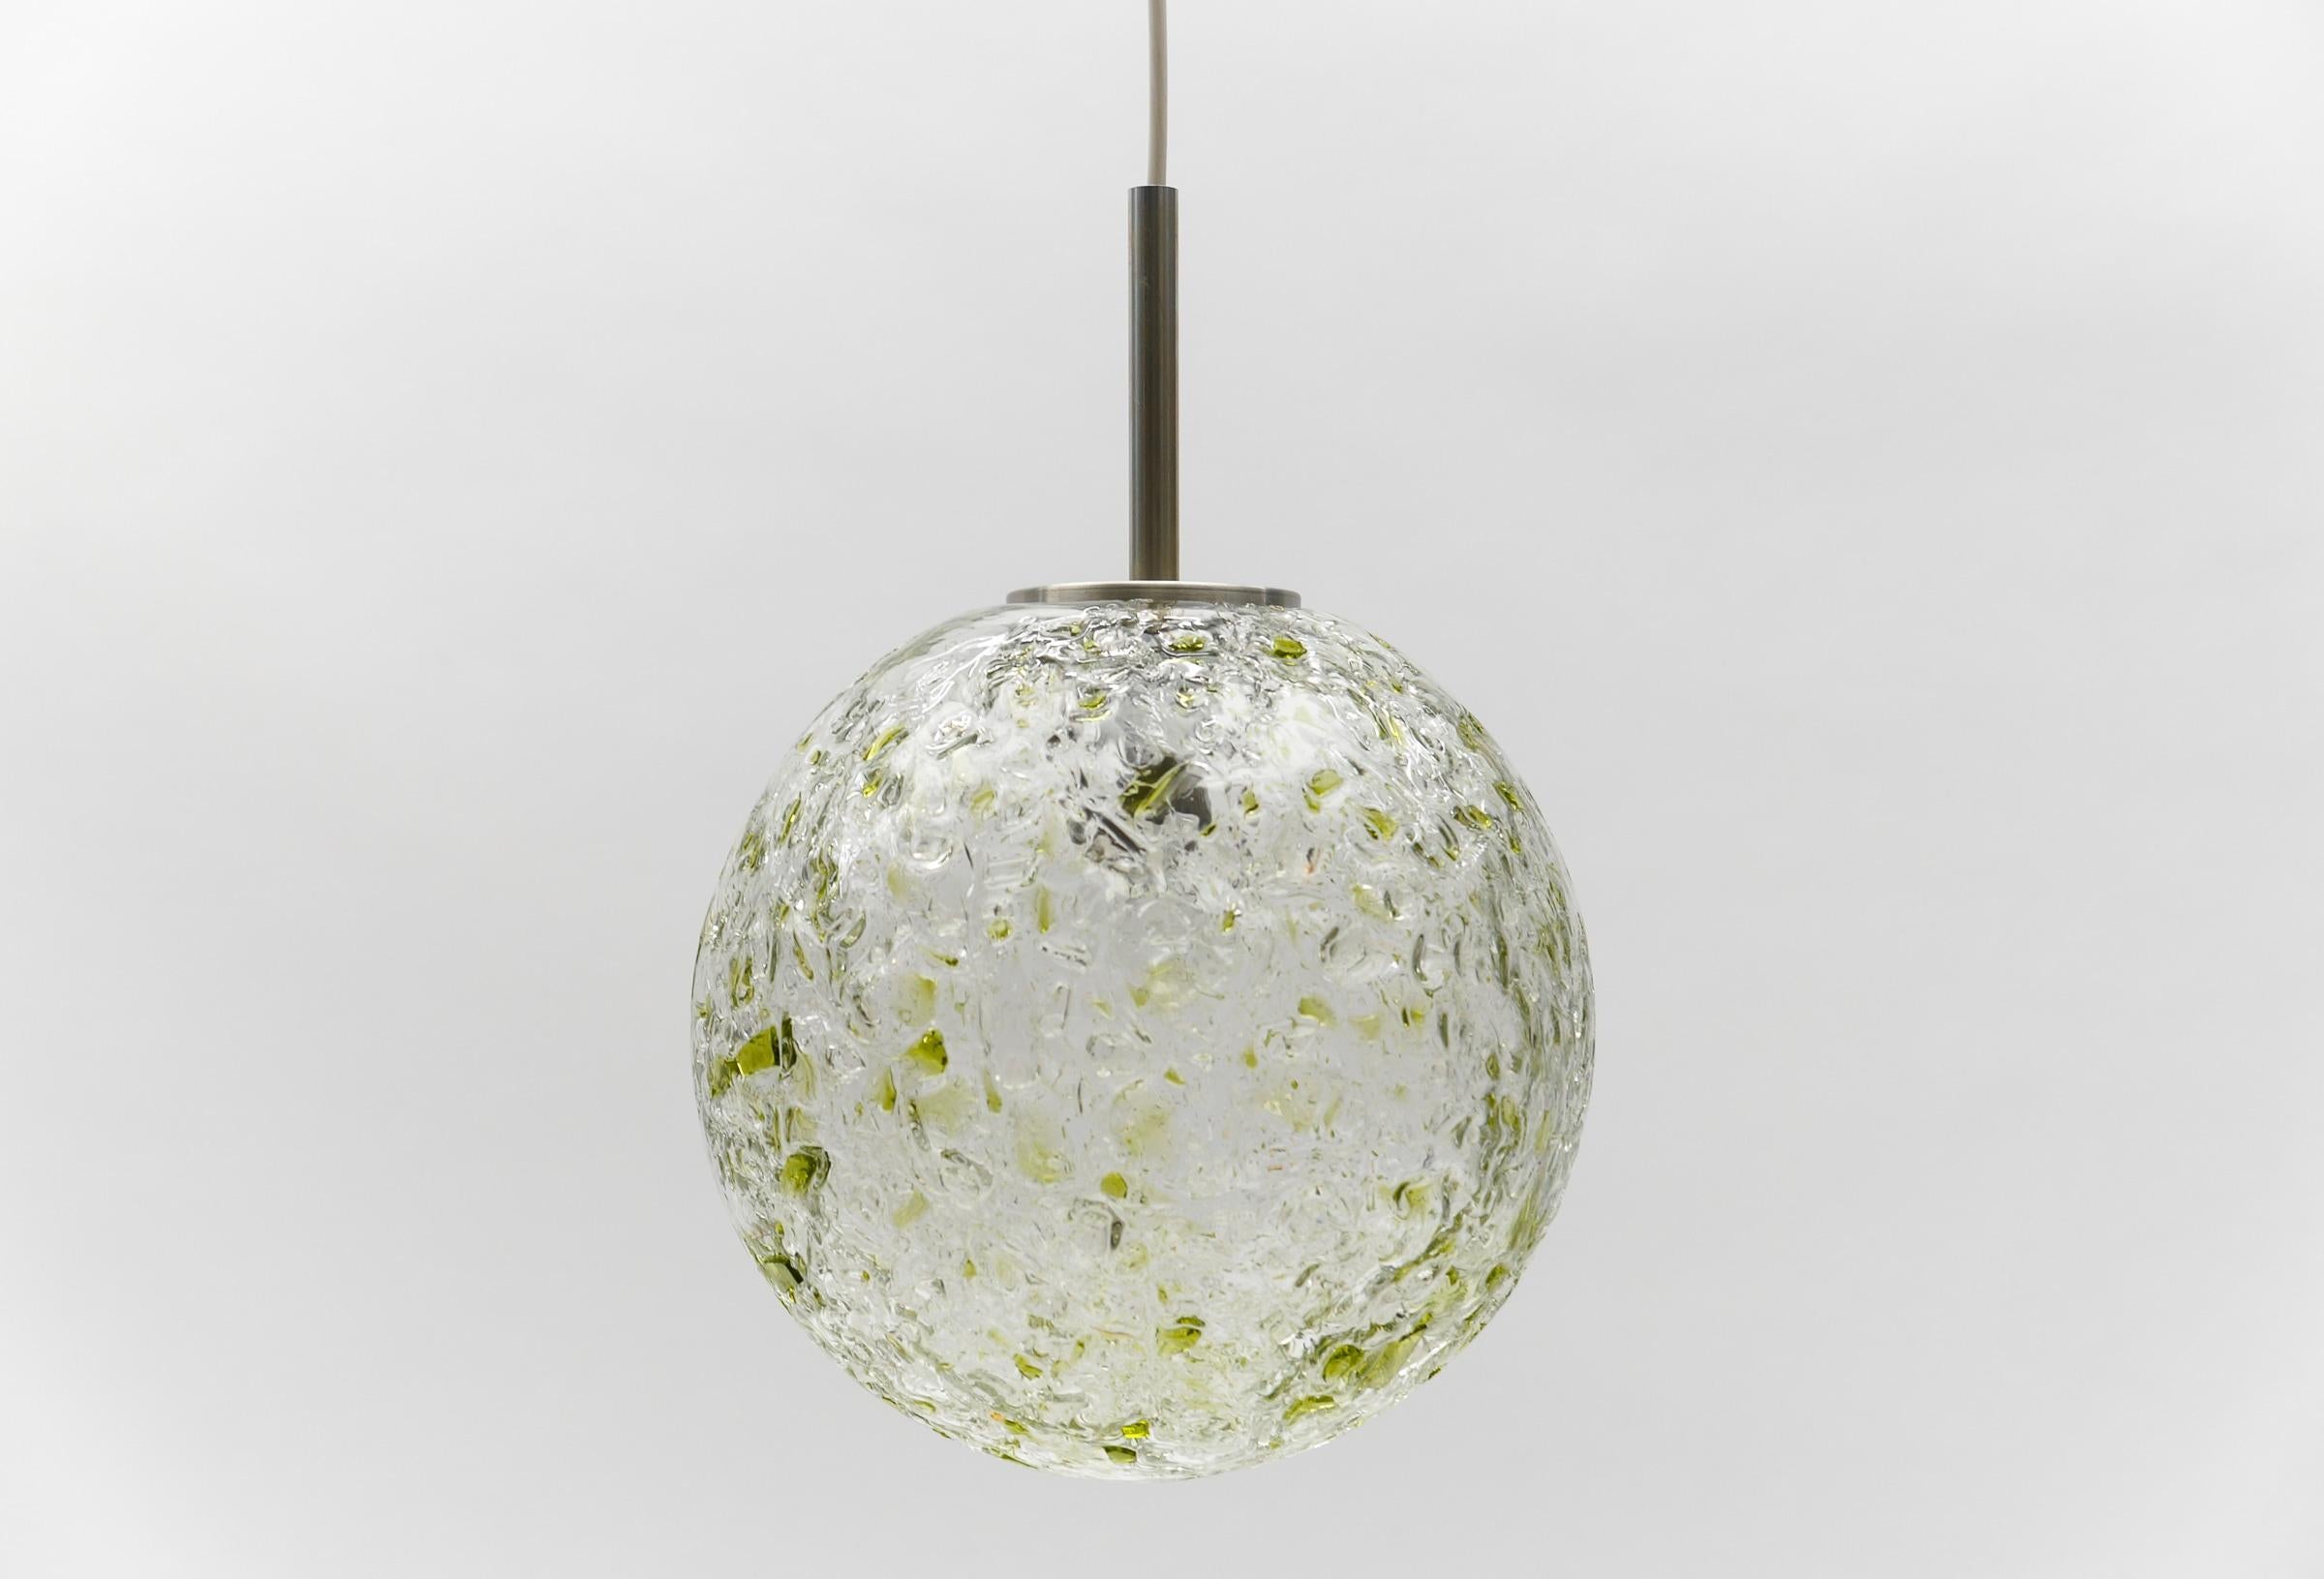 Metal Green Massive Glass Ball Pendant Lamp by Doria, 1960s Germany For Sale